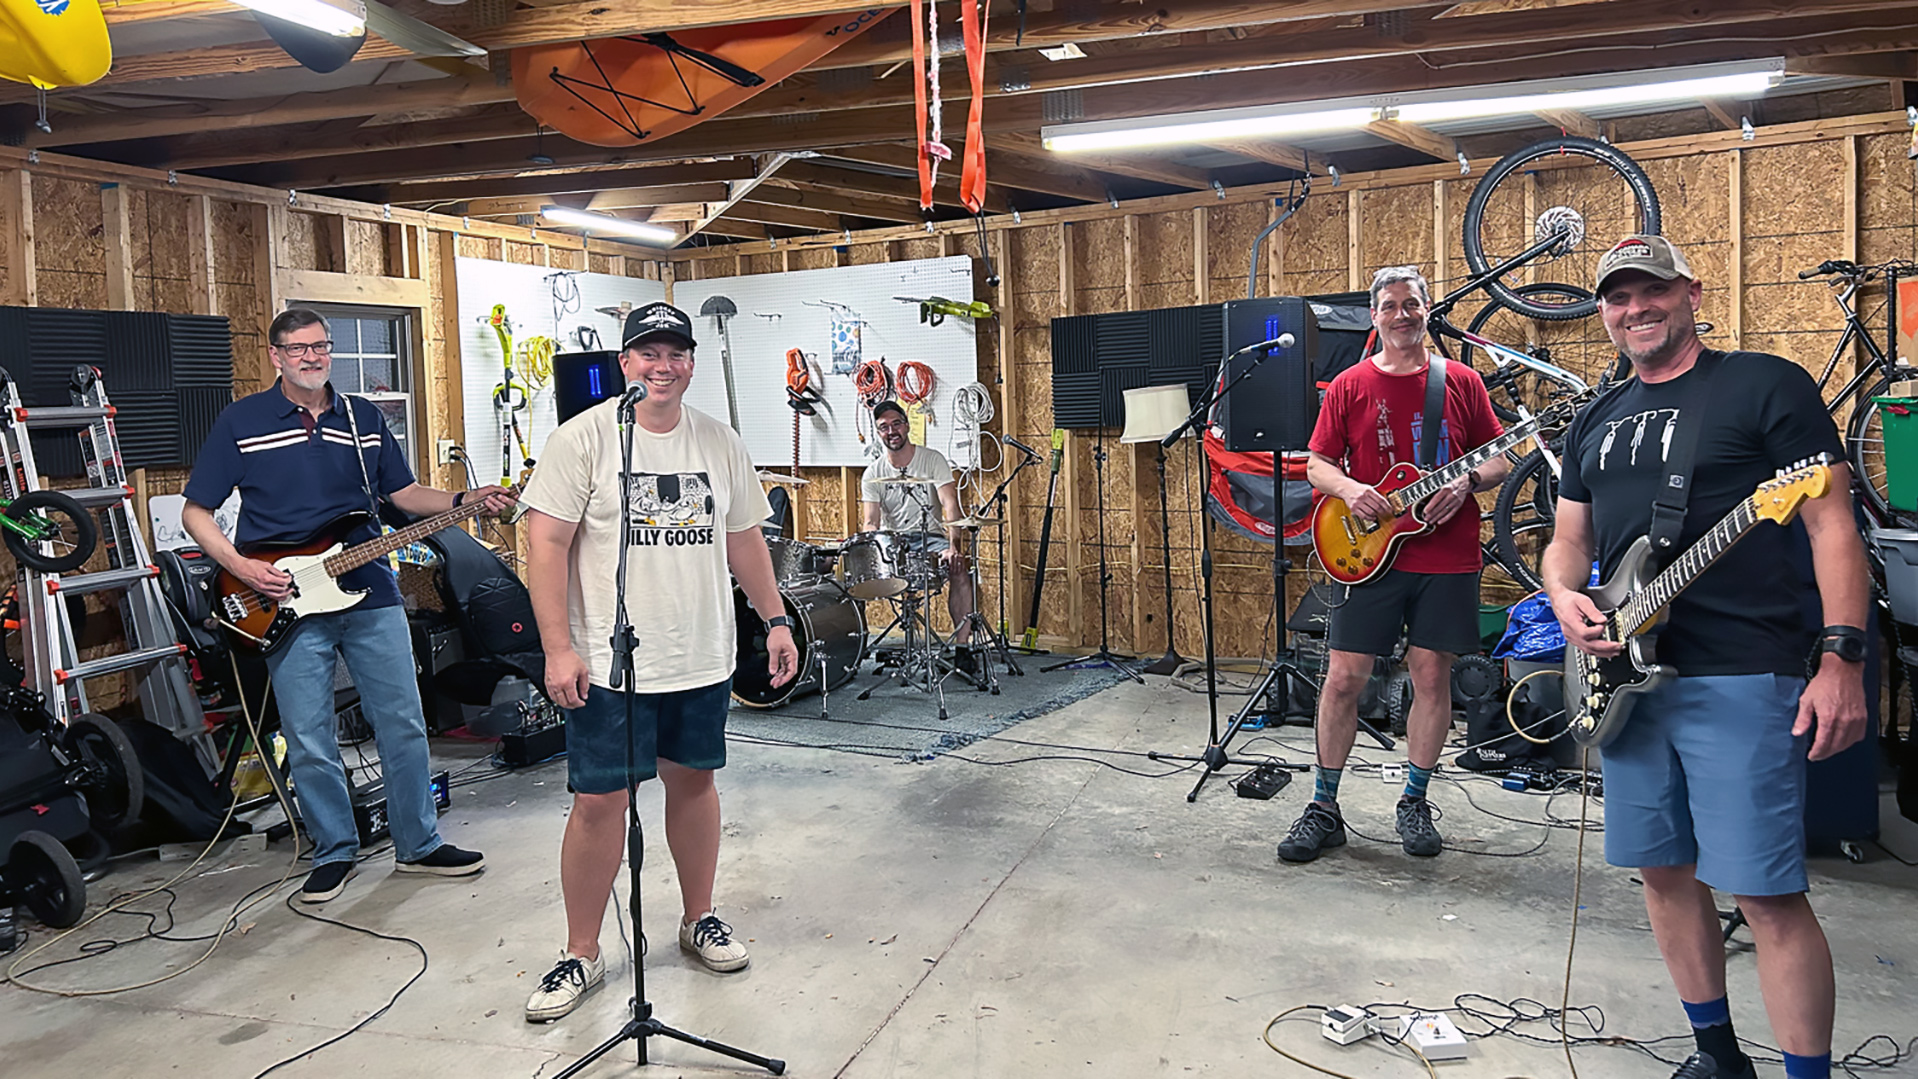 The Kensingtons, in a garage on Kensington Road, Homewood, Alabama: Bob Blalock on bass (retired PR guy), Ben Leach on lead vocals (banker), Dr. Sam Gentle on drums (neonatologist), Chris Horwedel on lead guitar (IT guy), and Ethan White on rhythm guitar (physical therapist)